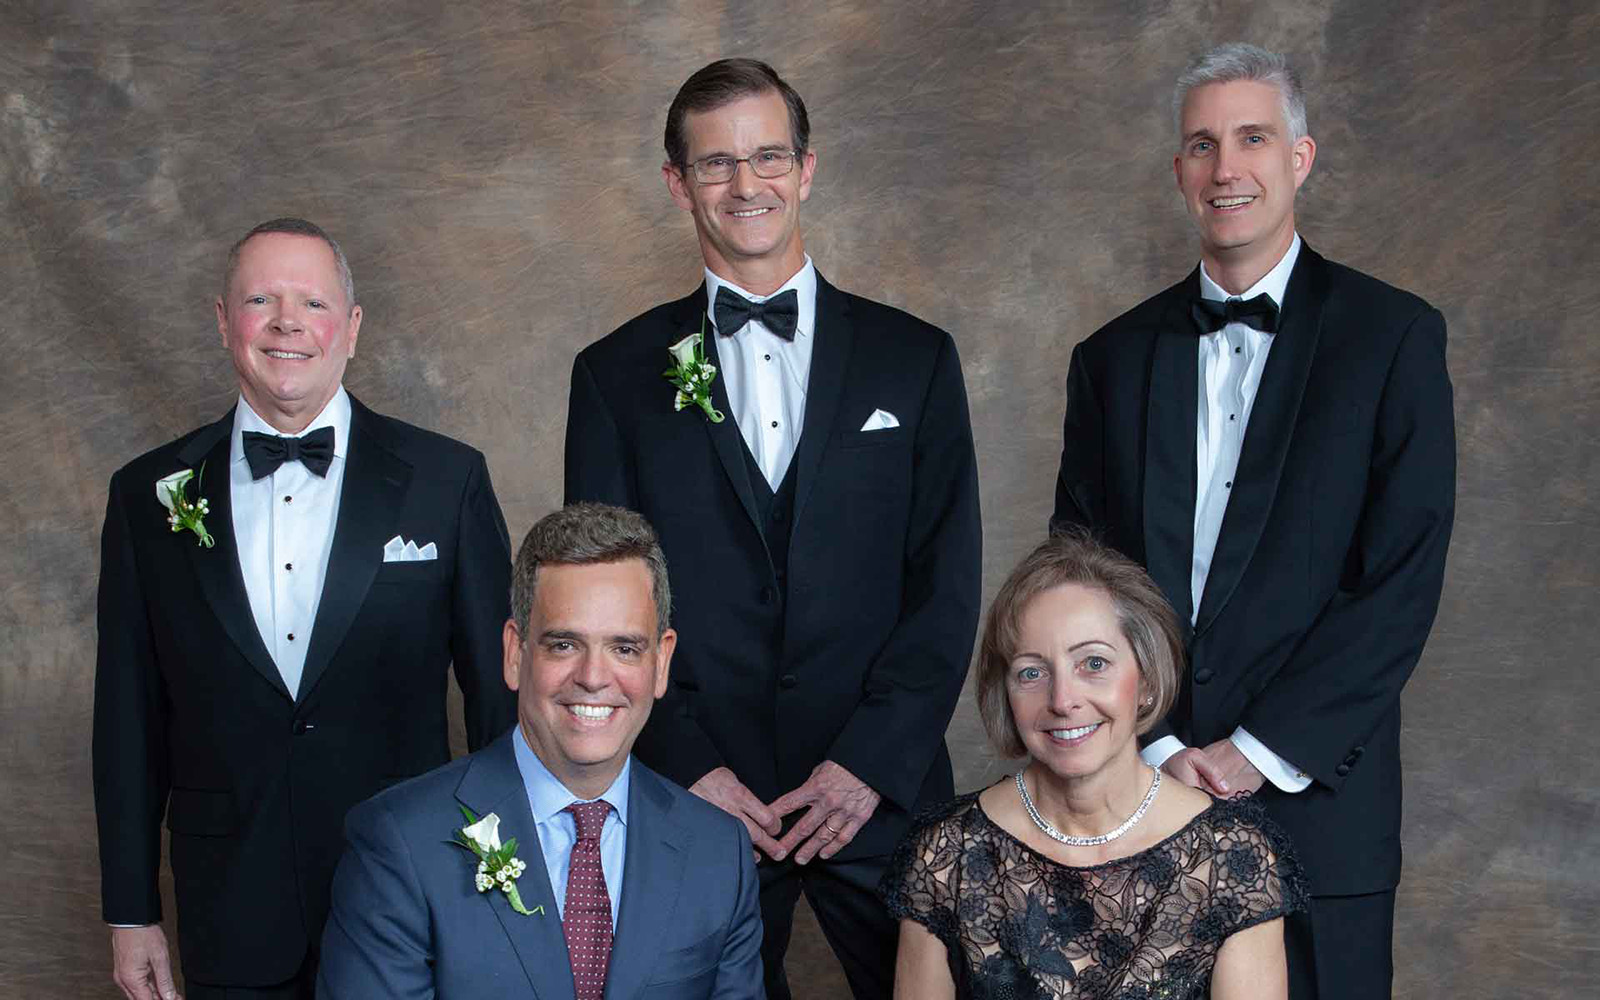 The new inductees into the UConn School of Business Hall of Fame posed for a picture prior to the event. From left standing: James Whalen ’82, Robert Chauvin ’78, and David Souder, interim Dean of the UConn School of Business. From left, seated: , George A. Barrios ’87, ’89 MBA and Mary Laschinger ’92 EMBA. (Thomas Hurlbut Photography)